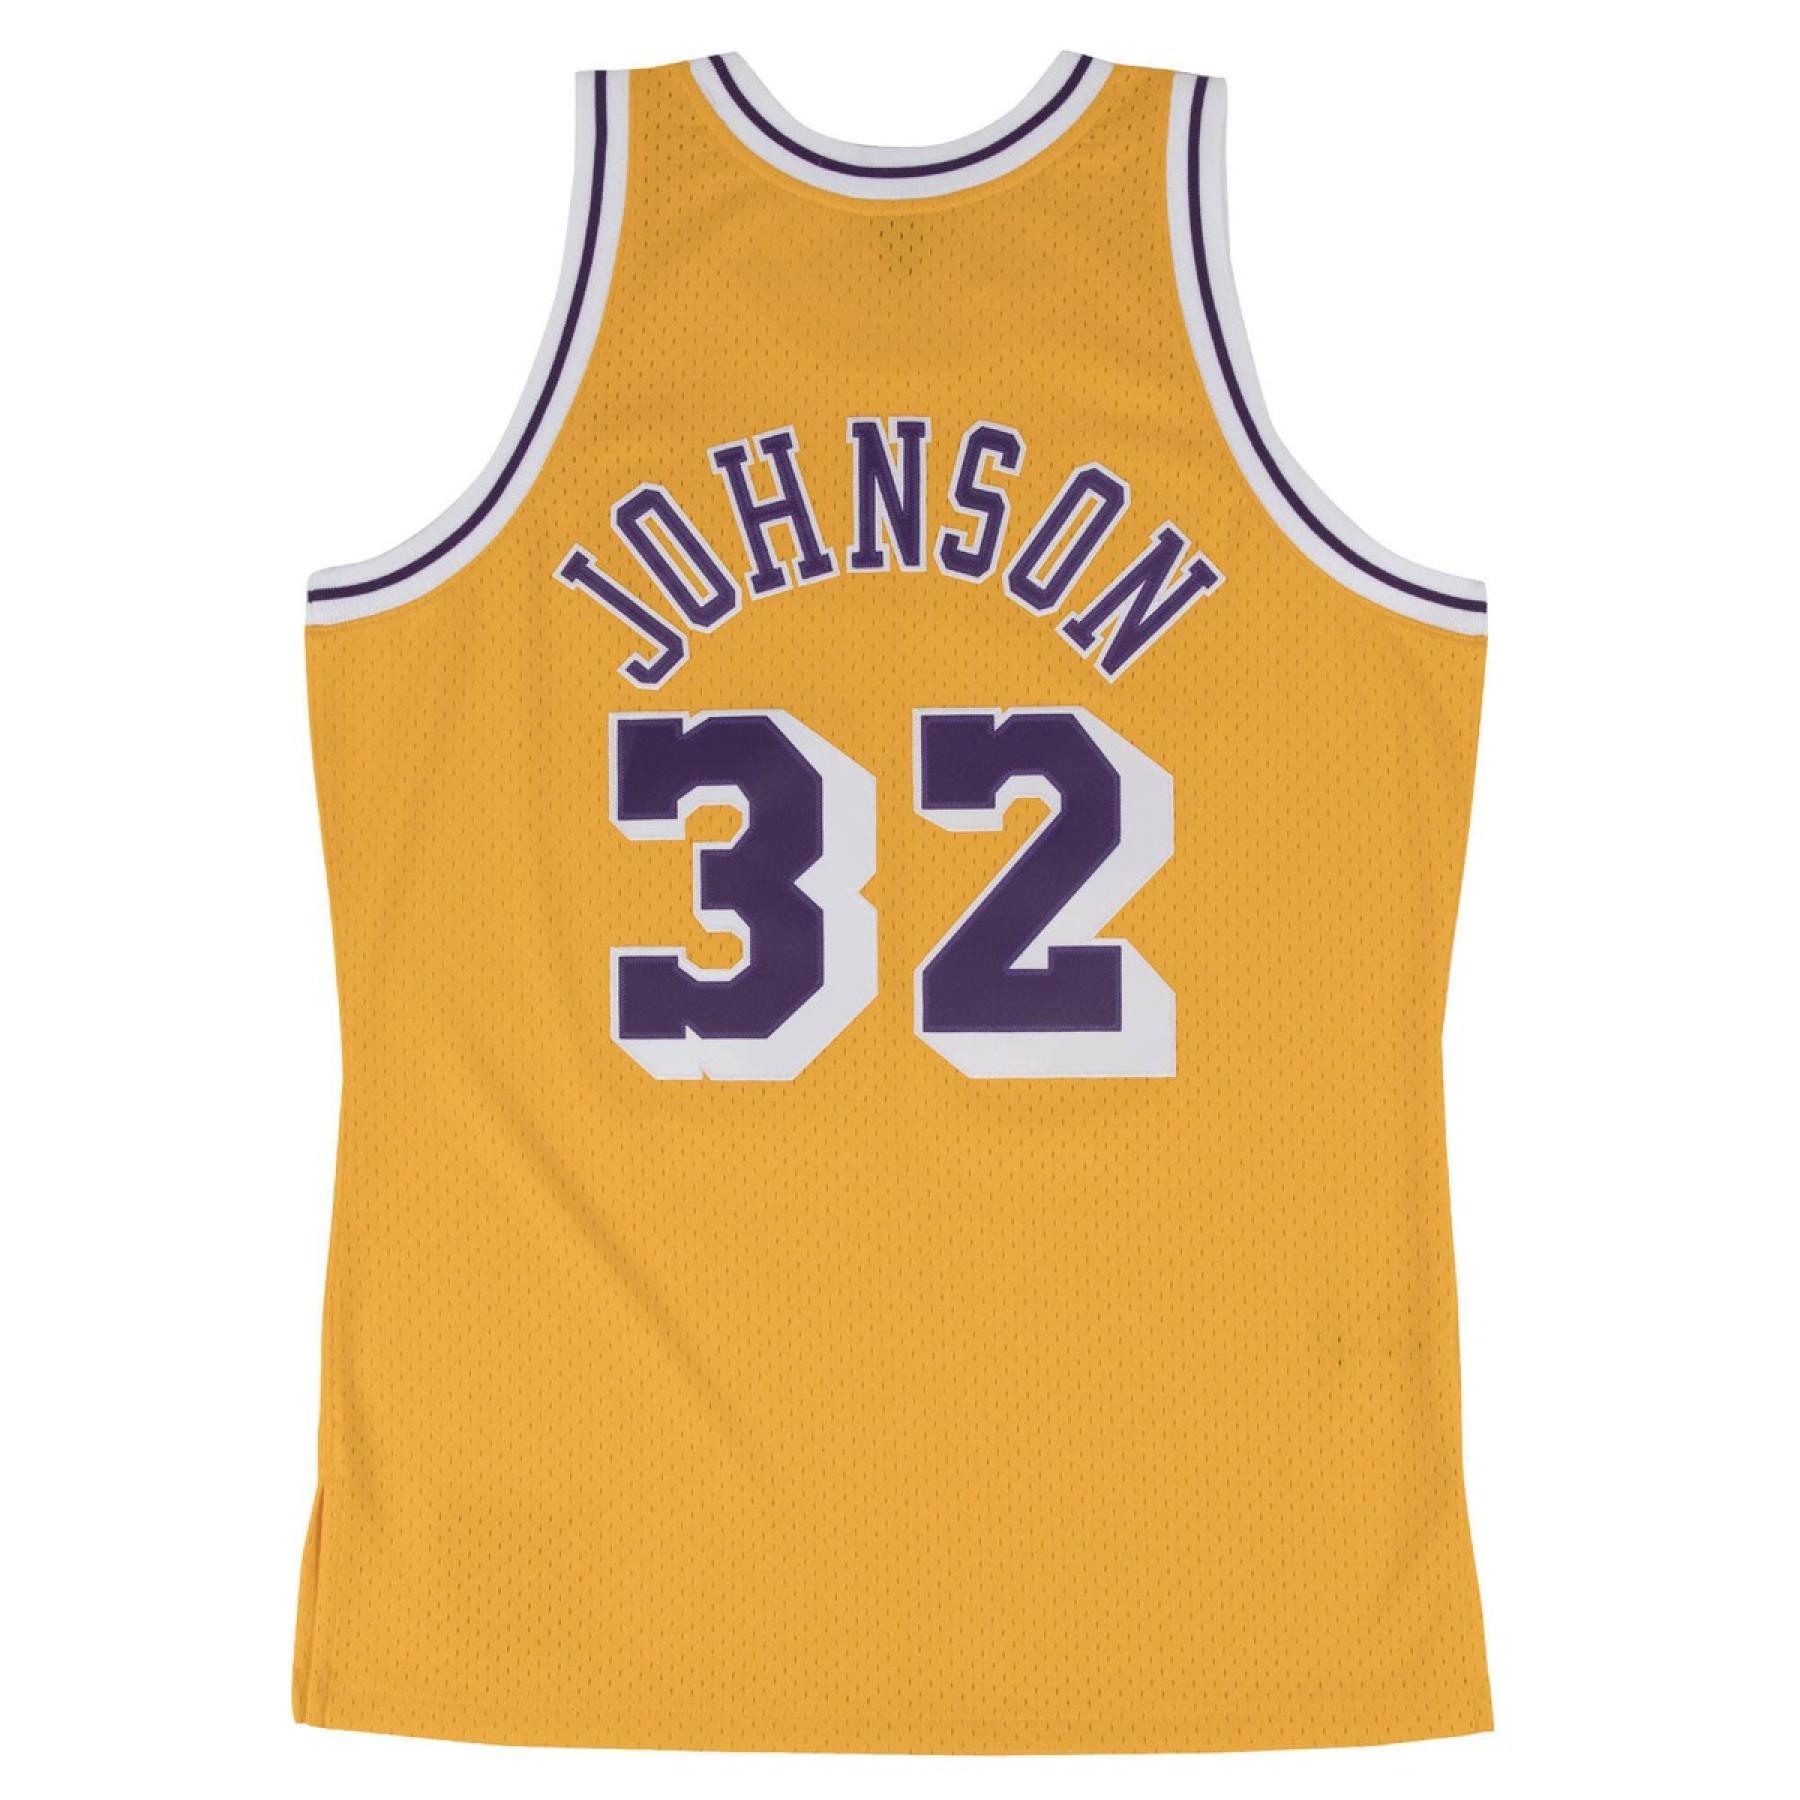 Magical johnson jersey Los Angeles Lakers 1984-85